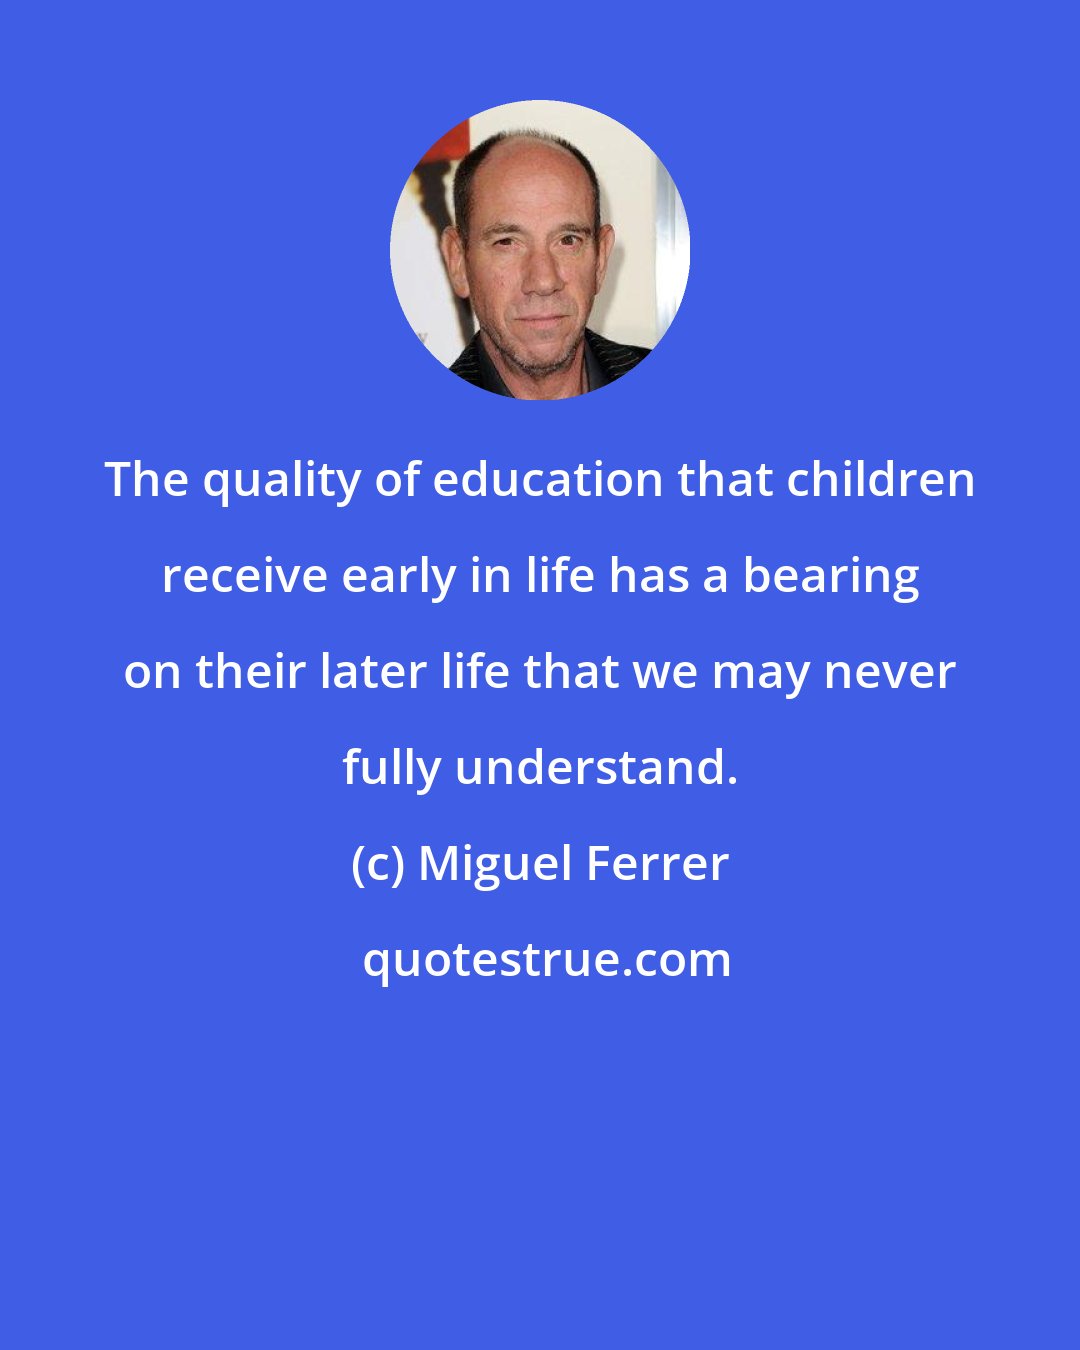 Miguel Ferrer: The quality of education that children receive early in life has a bearing on their later life that we may never fully understand.